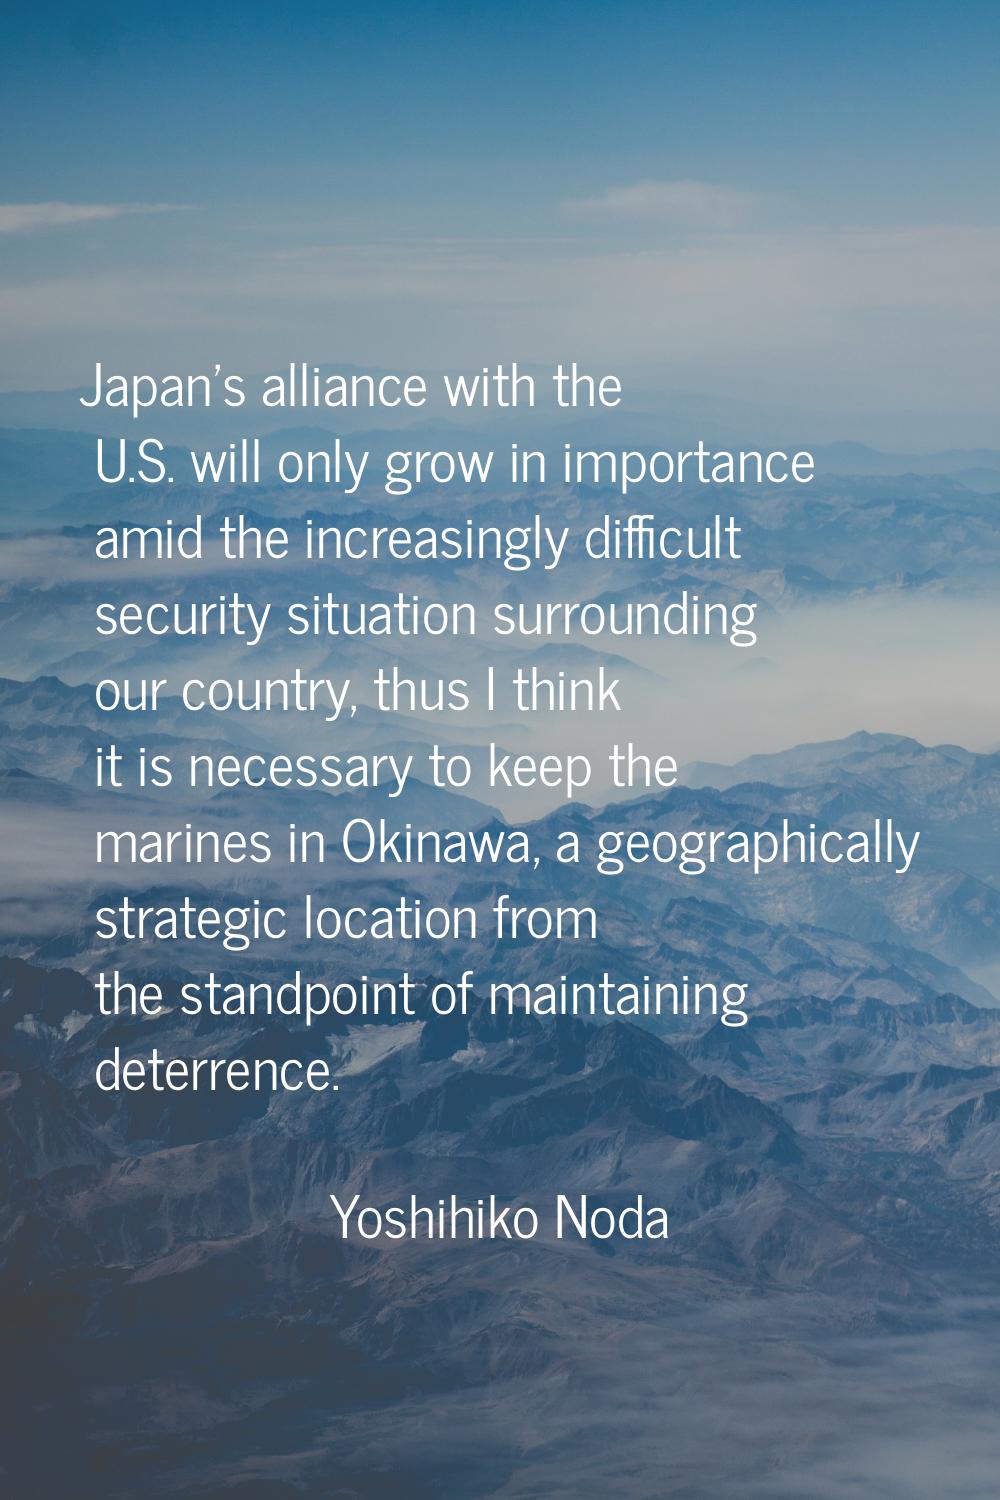 Japan's alliance with the U.S. will only grow in importance amid the increasingly difficult securit